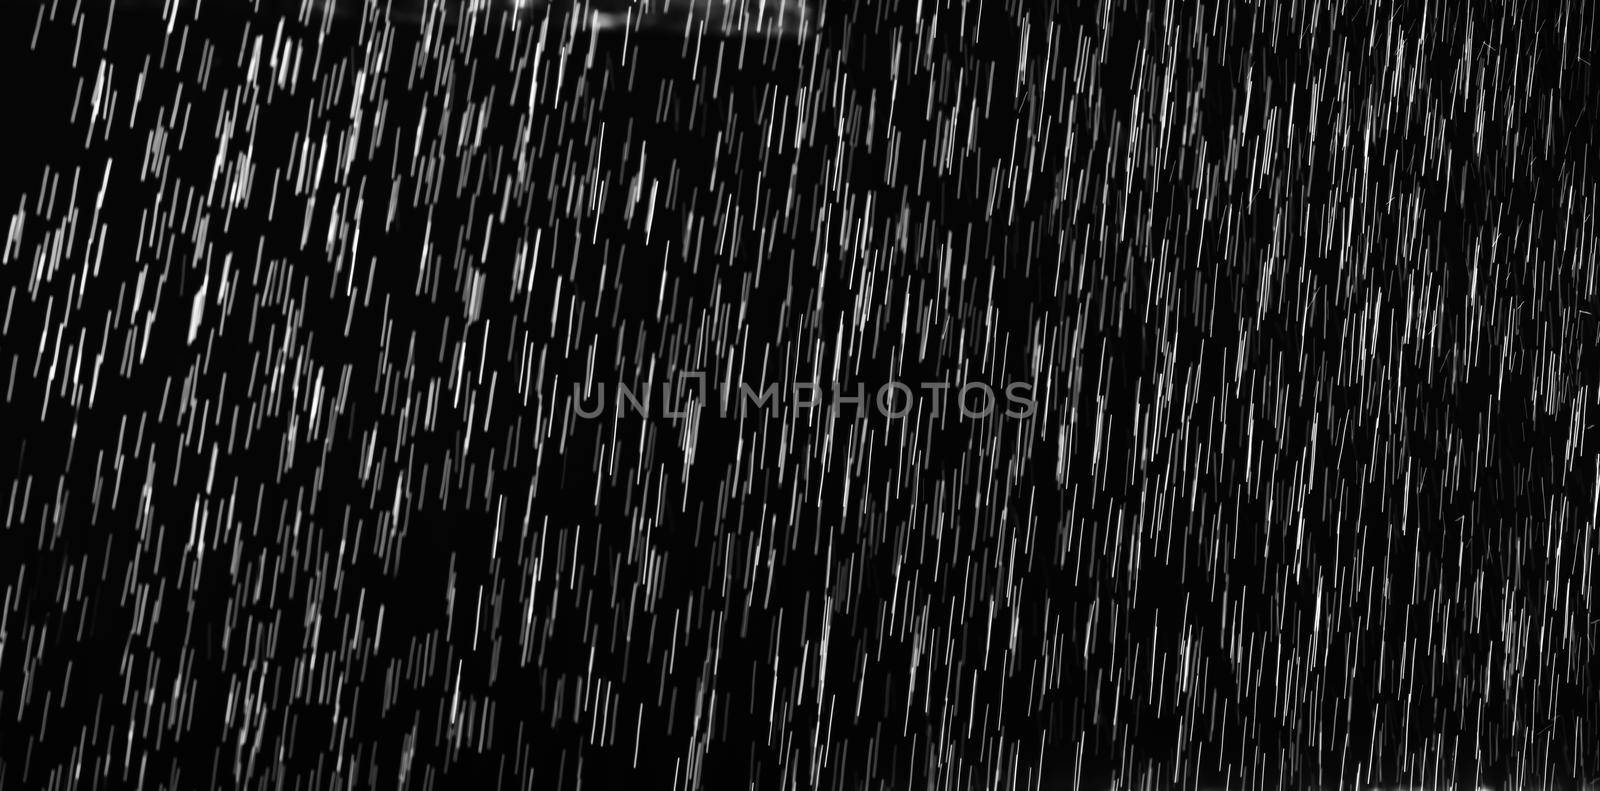 Rain on black. Abstract splashes of water on a black background for screen blending mode and photo retouching.